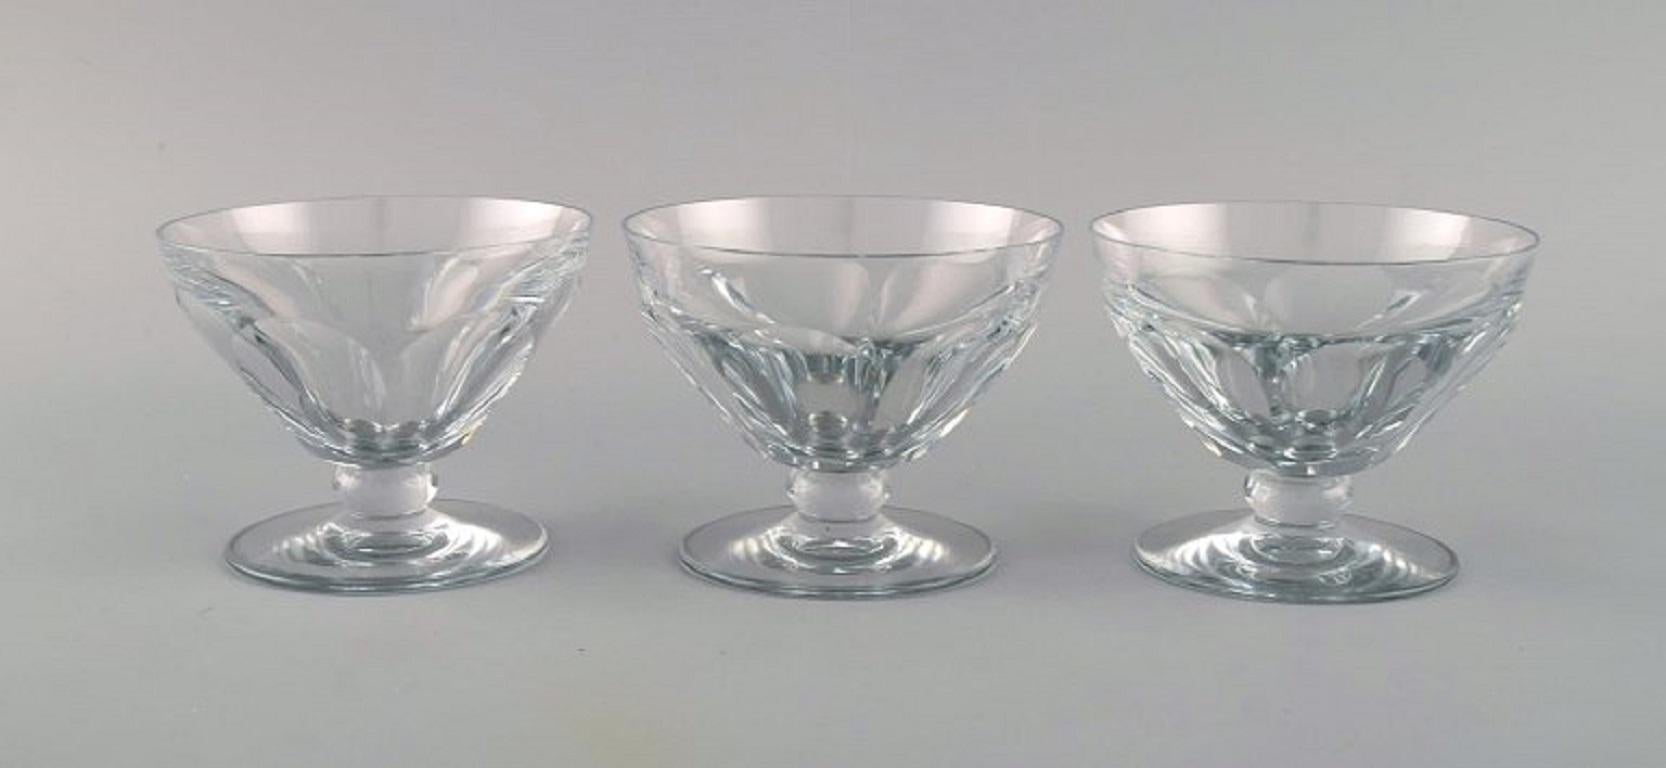 Baccarat, France. Three tallyrand glasses in clear mouth-blown crystal glass. Mid-20th century.
Measures: 10.5 x 8.2 cm.
In perfect condition.
Stamped.